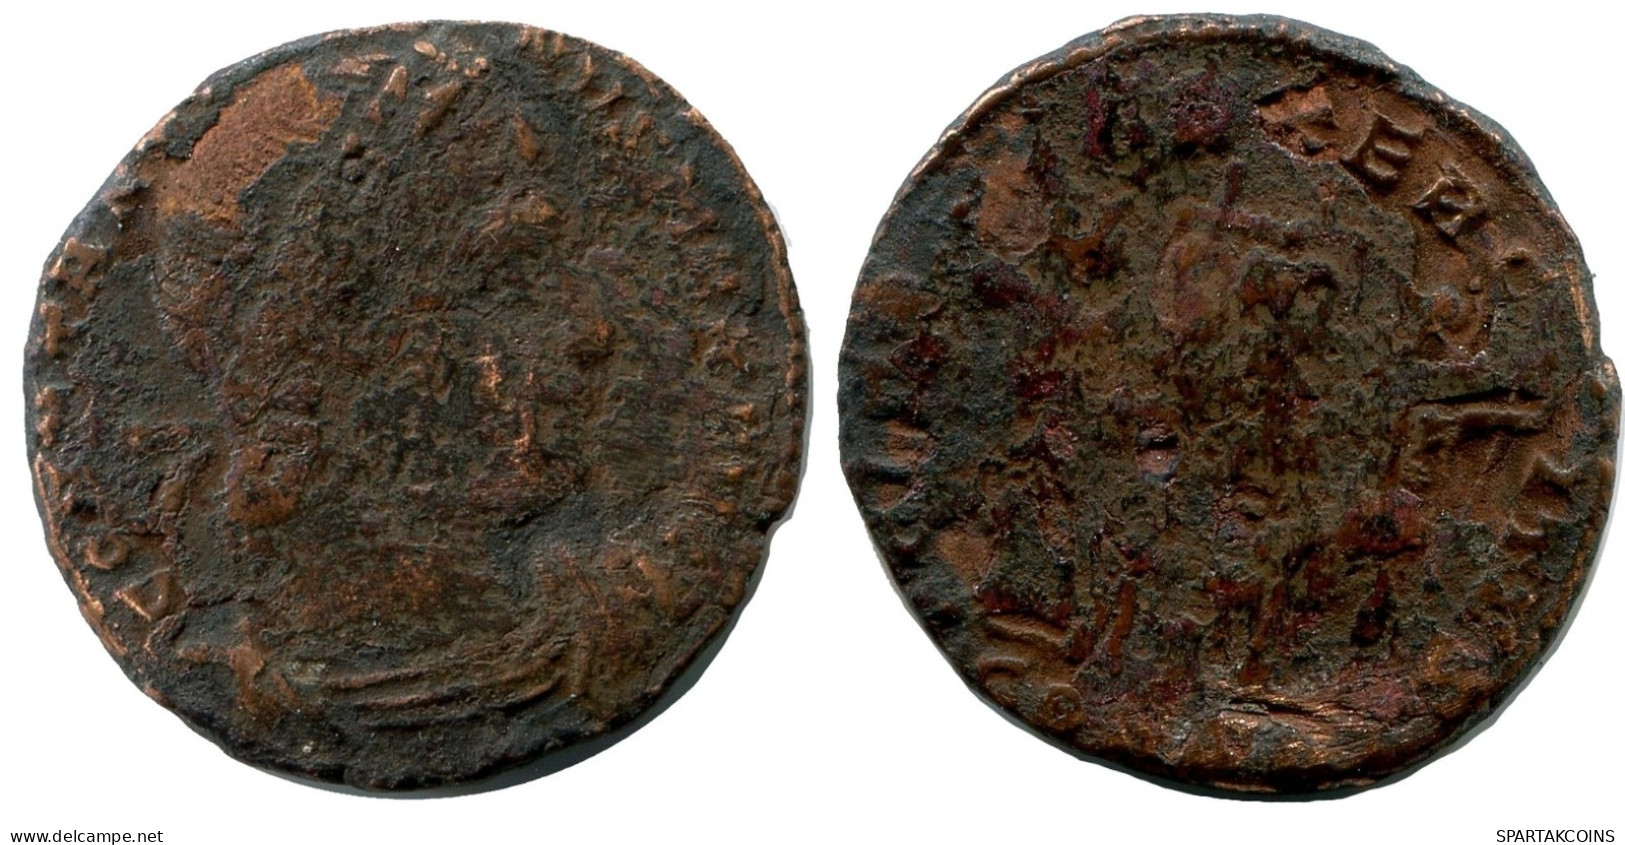 CONSTANTINE I CONSTANTINOPLE FROM THE ROYAL ONTARIO MUSEUM #ANC10817.14.E.A - El Imperio Christiano (307 / 363)